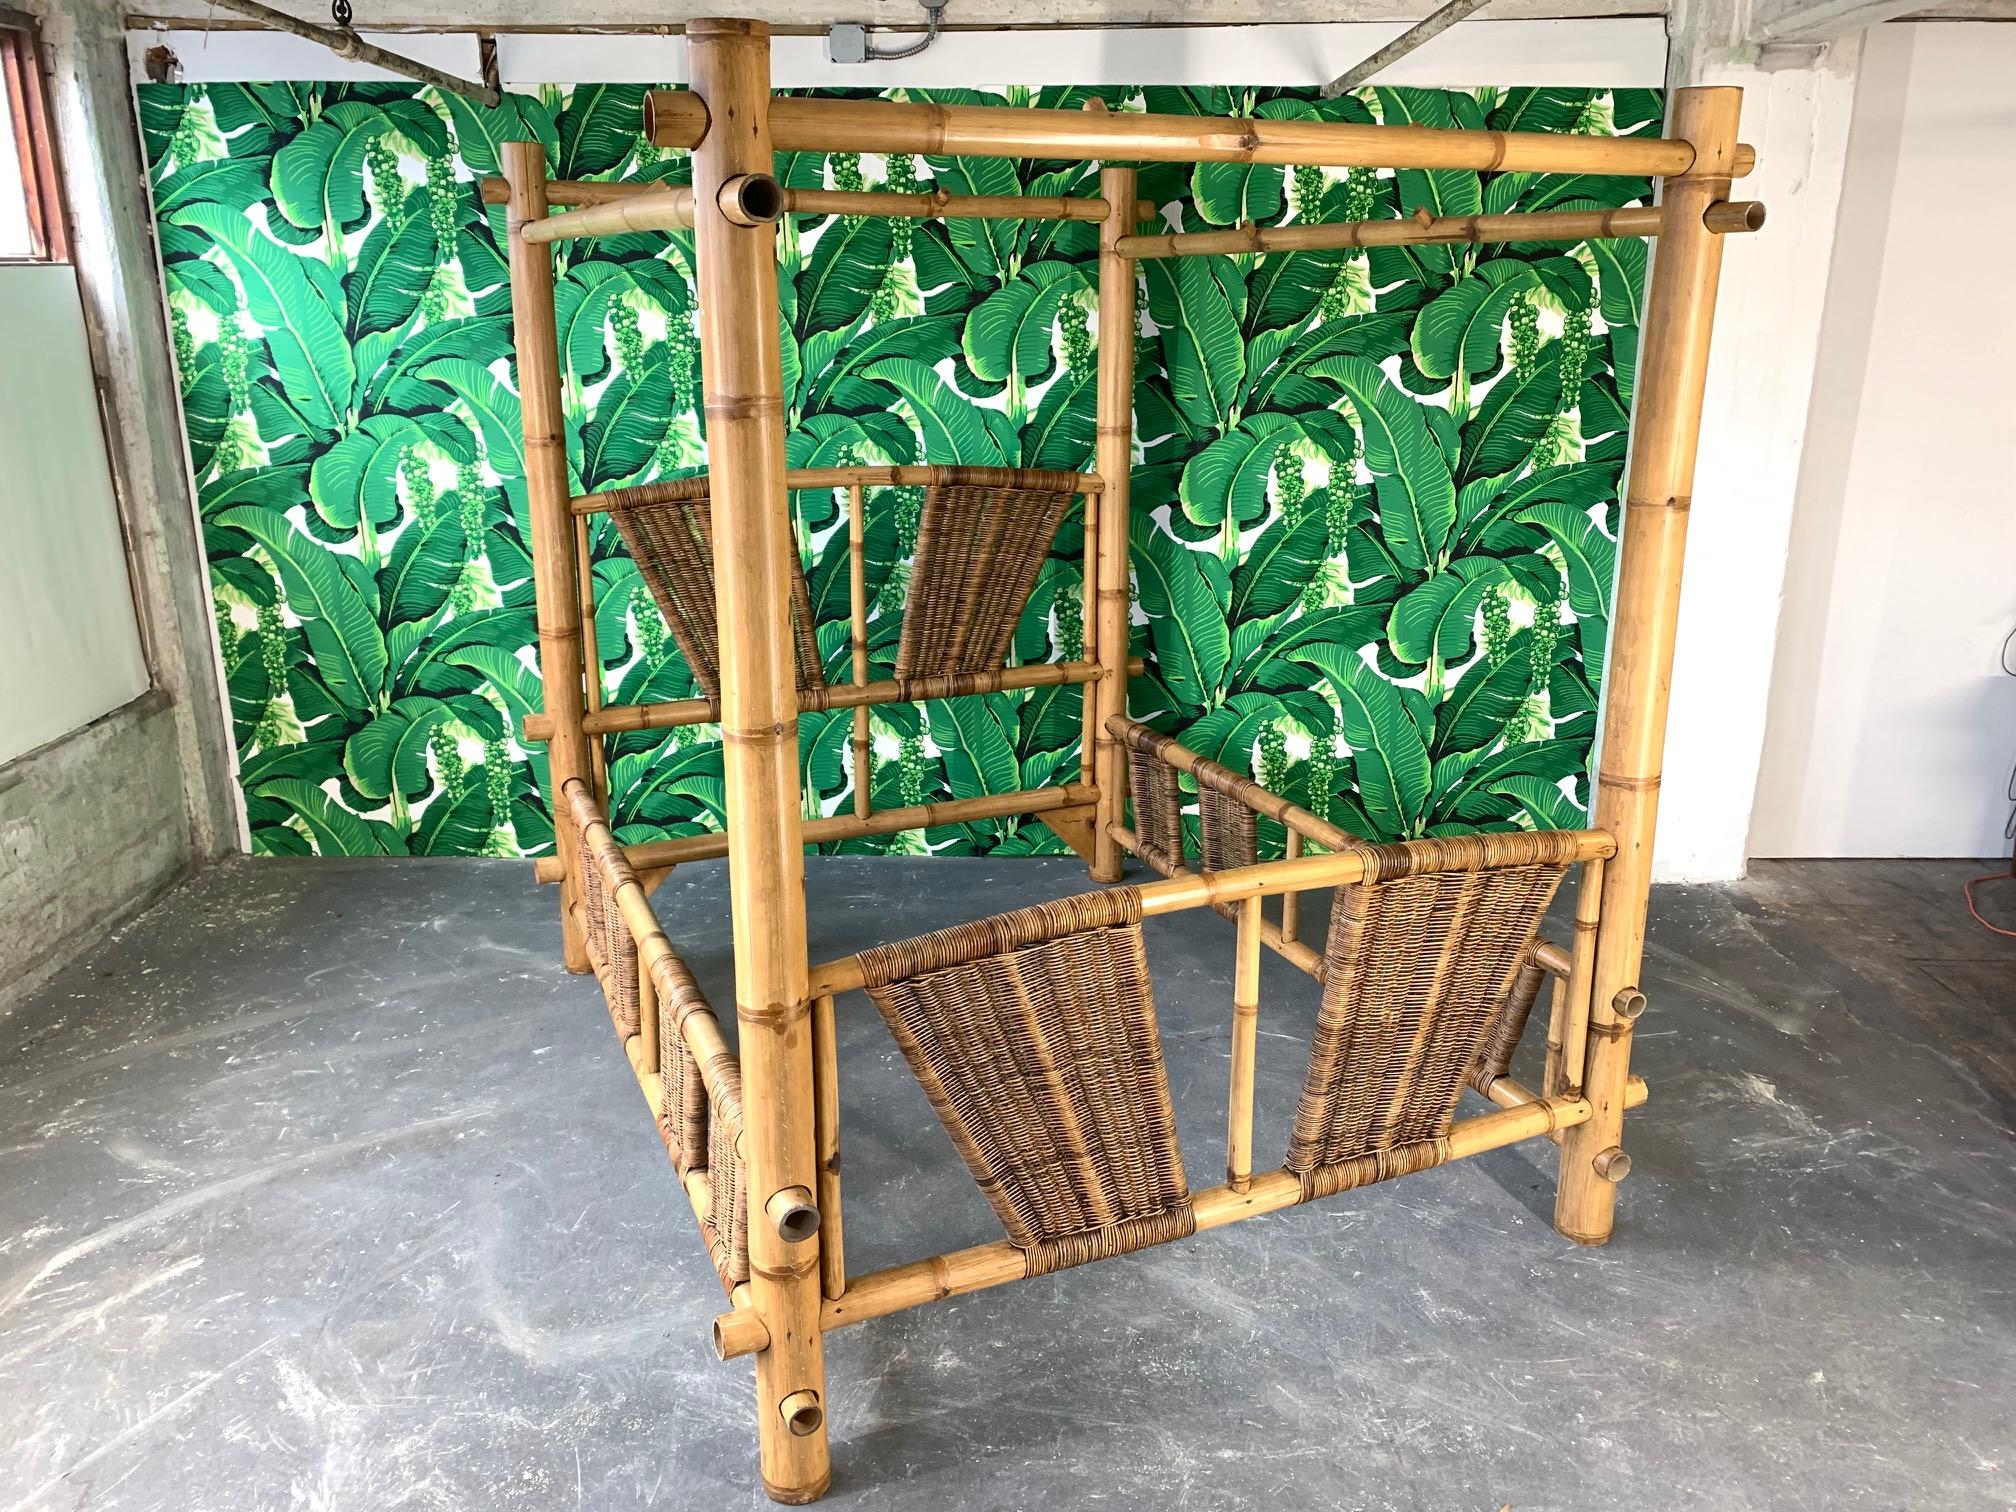 Queen size canopy bed constructed from oversized bamboo. Rattan detailing woven throughout. Very good vintage condition with only very minor signs of age appropriate wear.
Measures: Total width 76